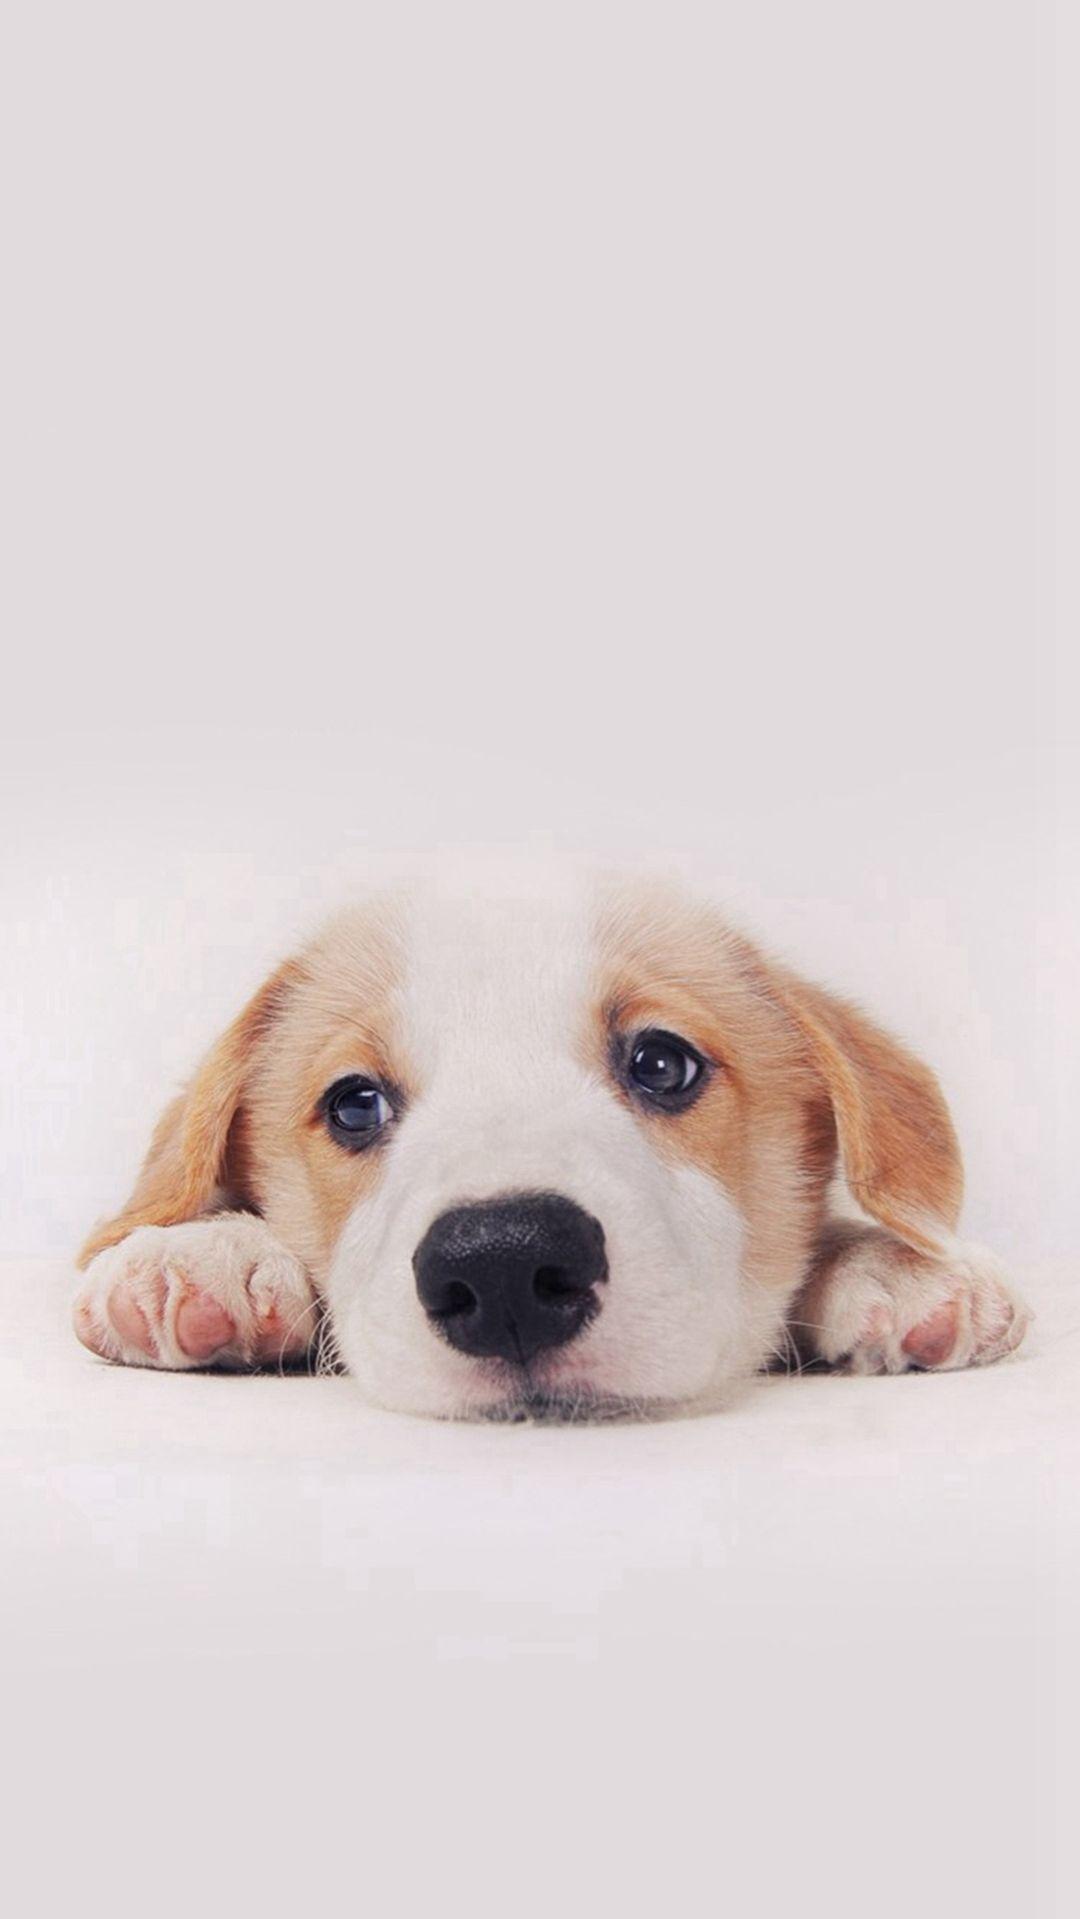 41] Cute Dog Phone Wallpapers